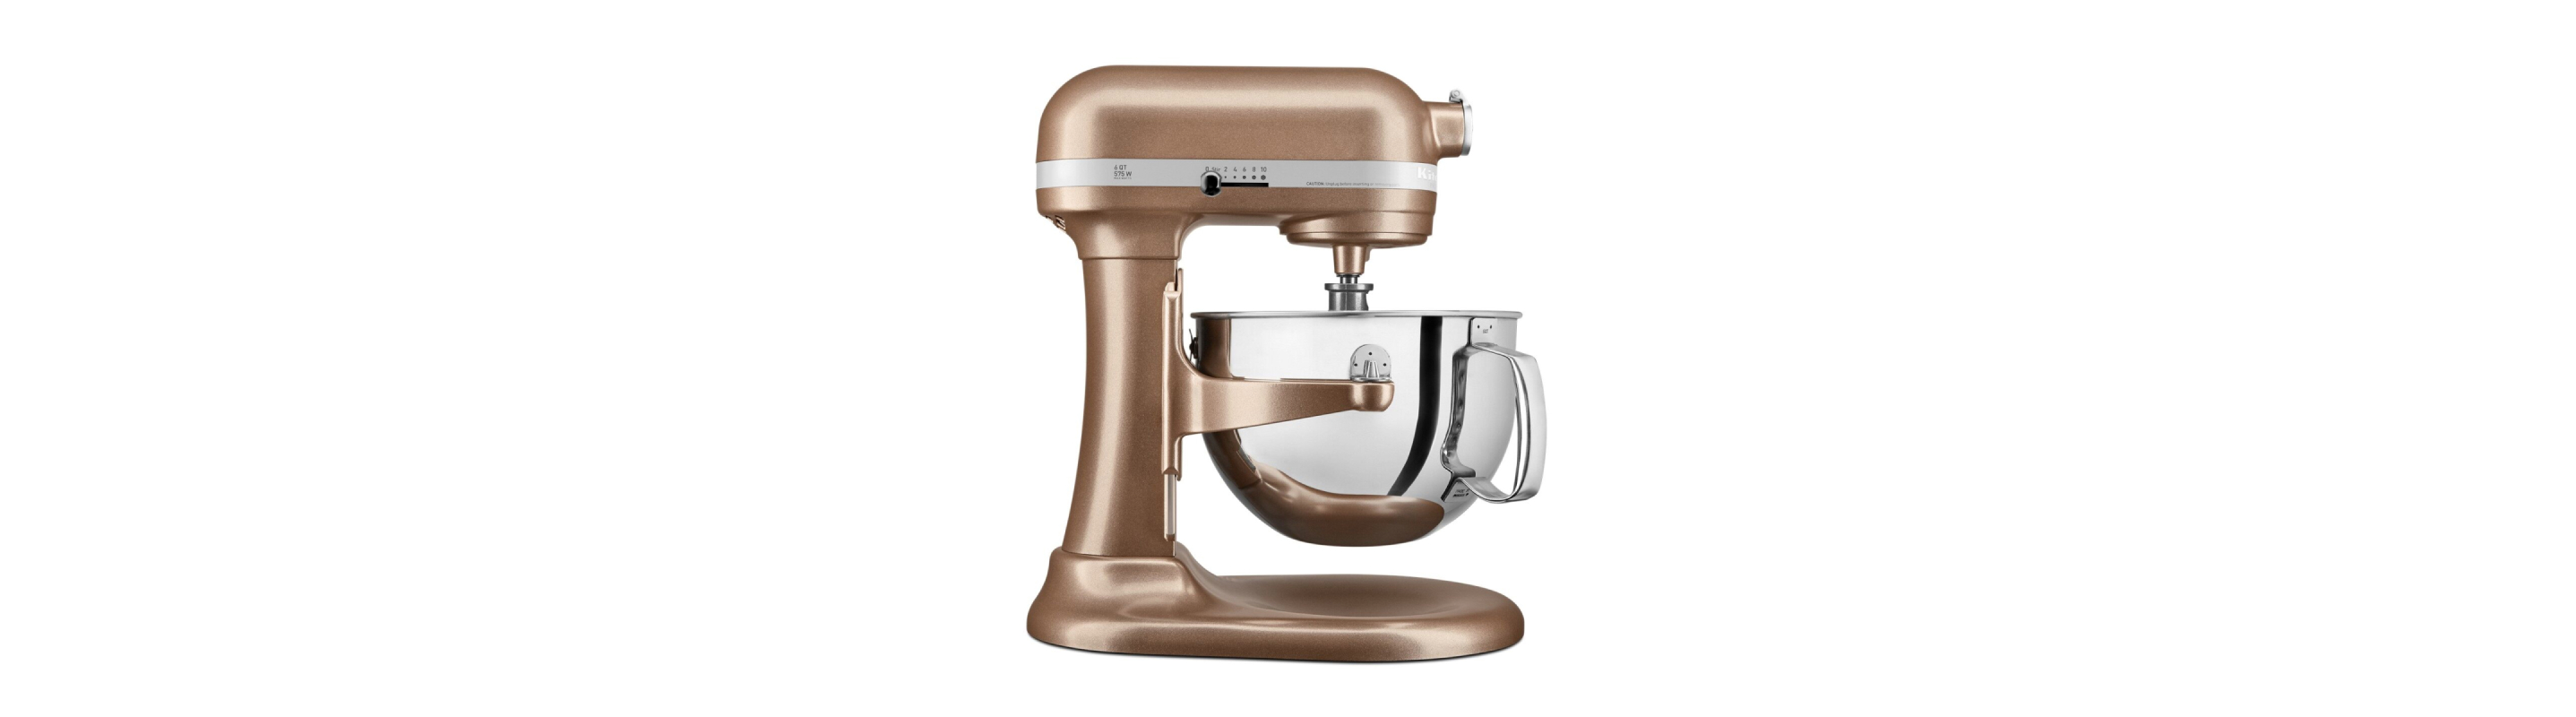 Copper Clad Bowl-Lift Stand Mixer from KitchenAid brand